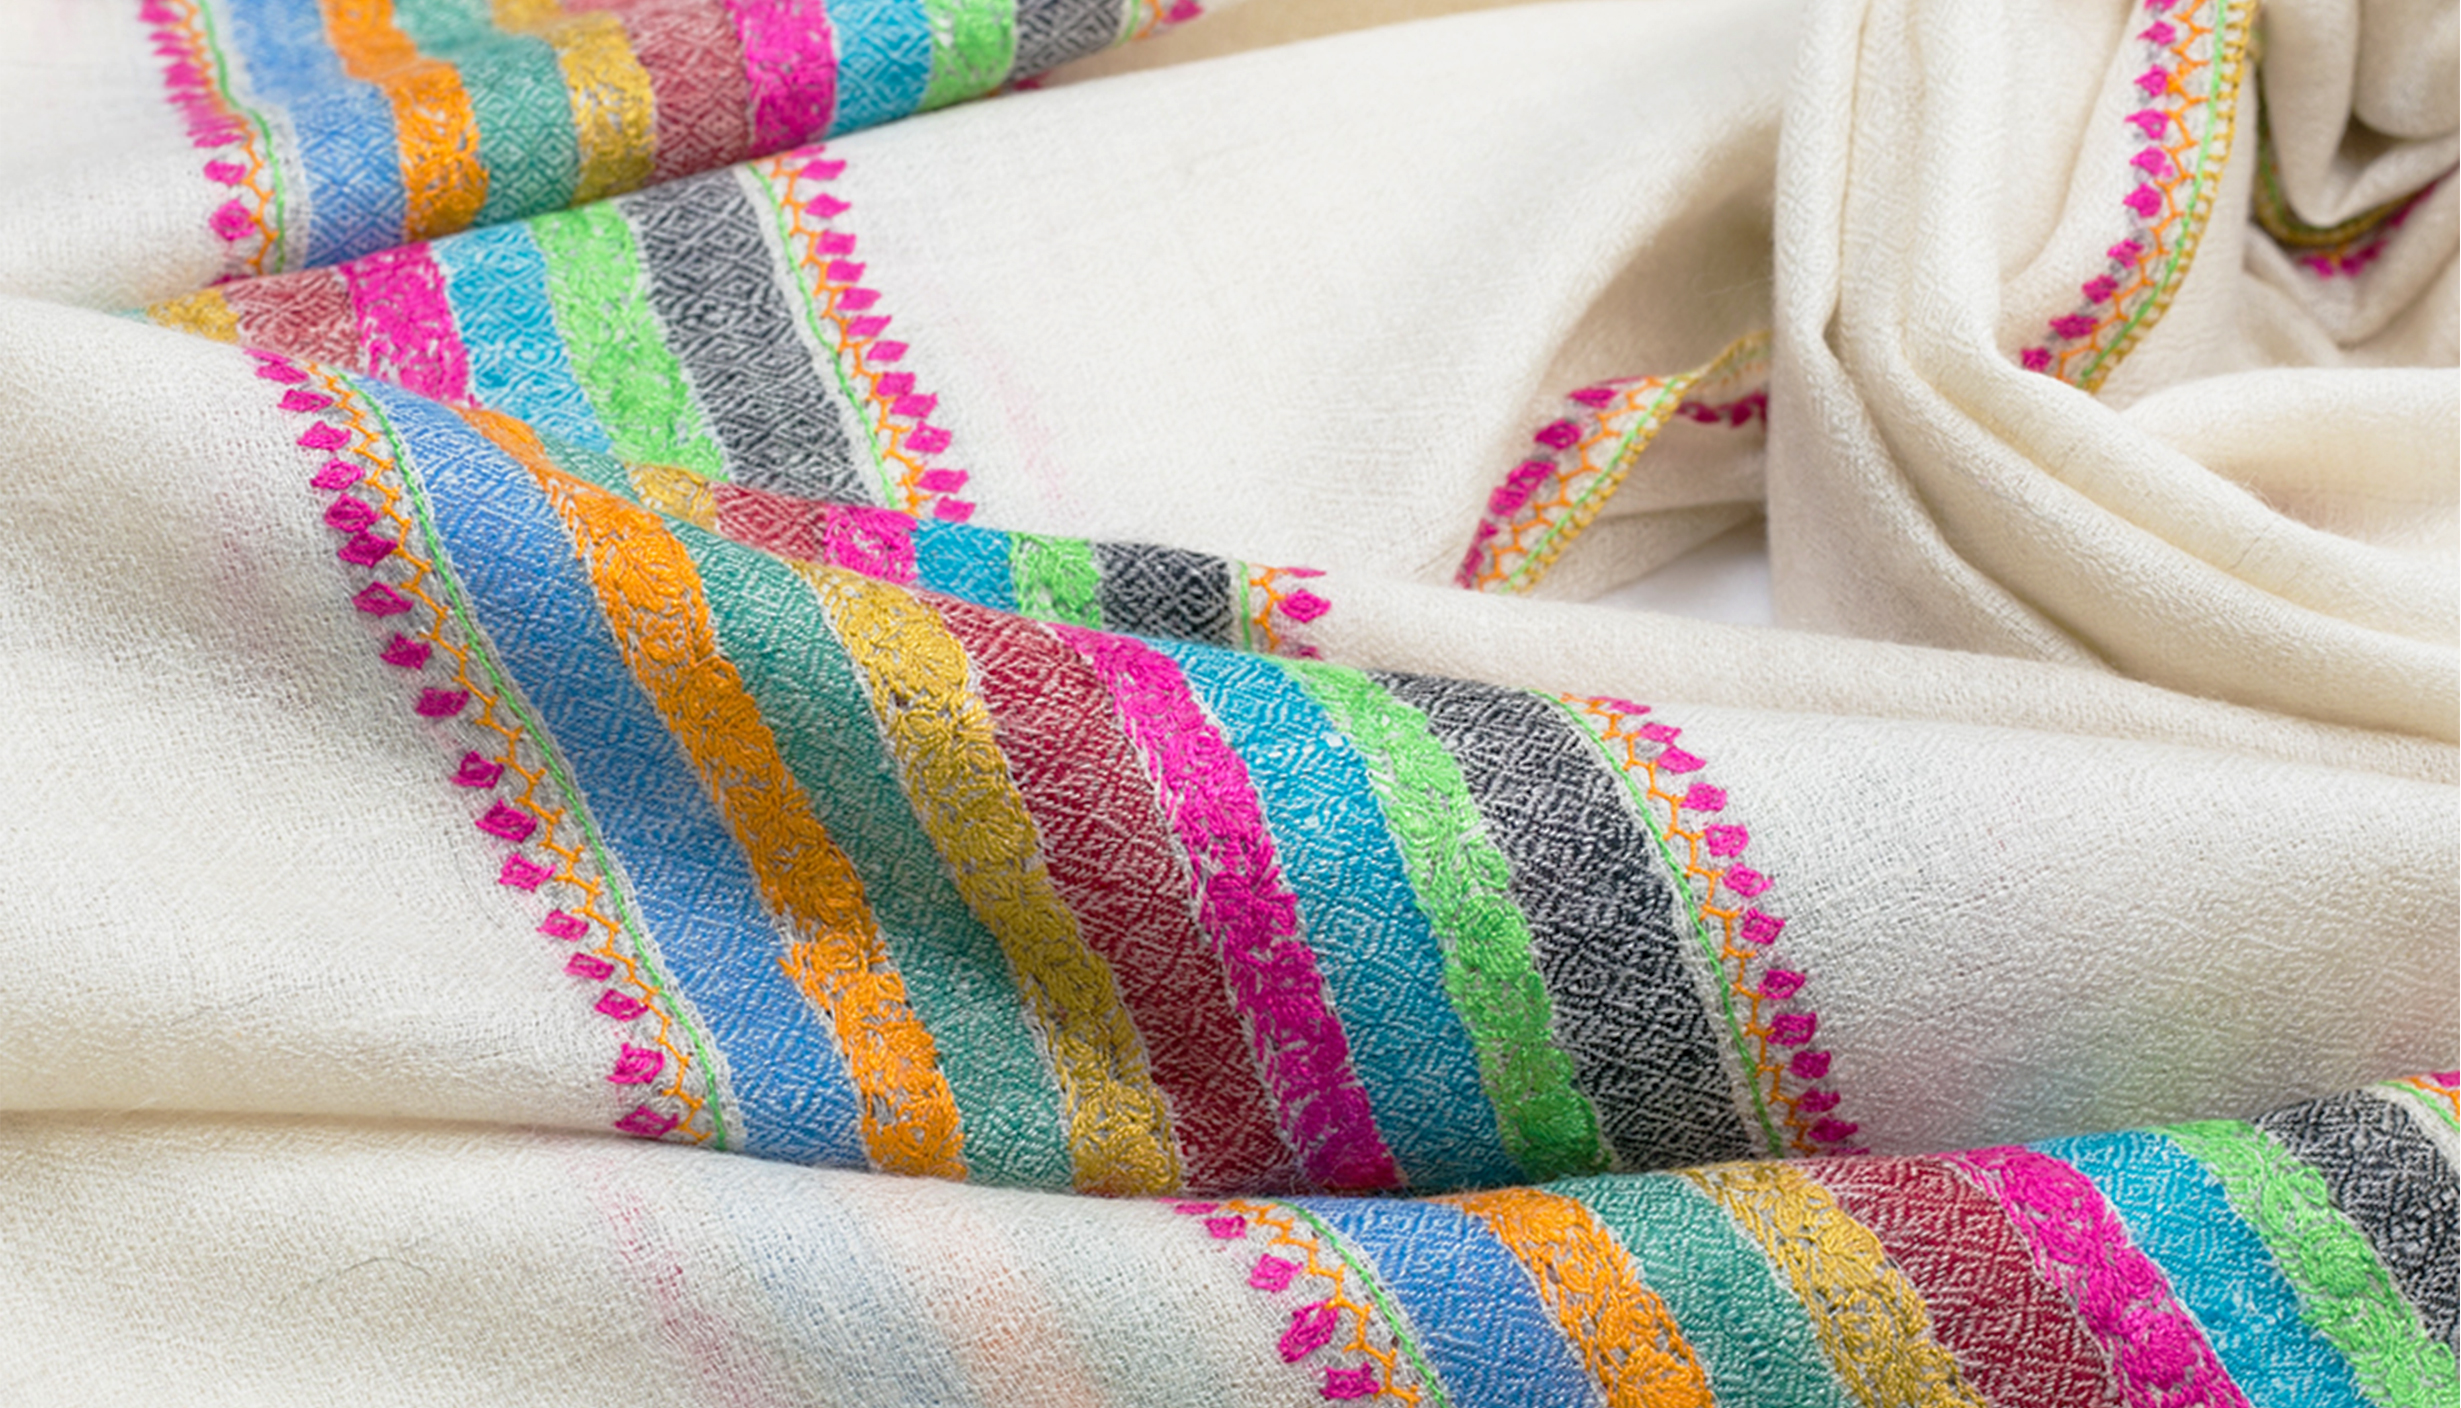 Pashmina Vs Cashmere: Know The Difference